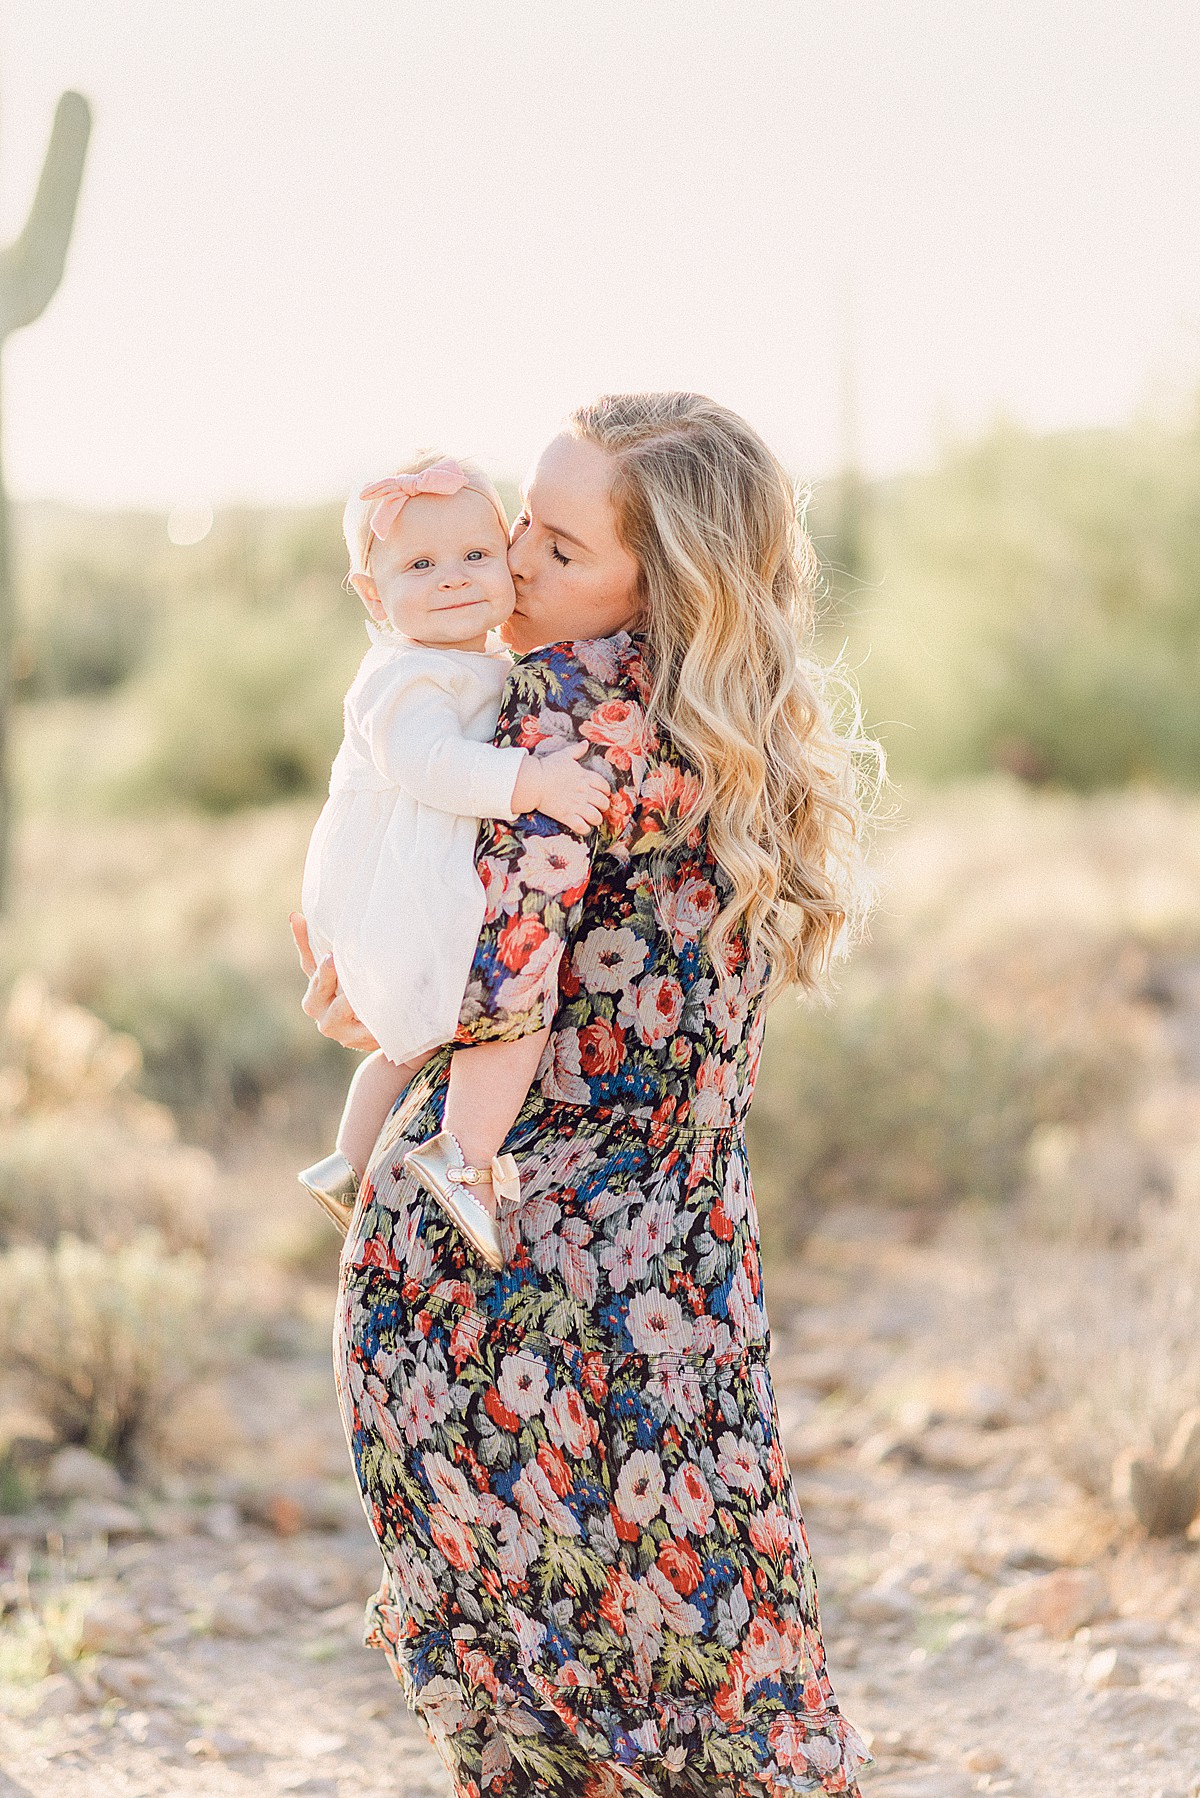 Mommy and me photoshoot in Phoenix desert with baby girl. Mom is wearing a floral patterned dress and 6 month baby girl in white dress.